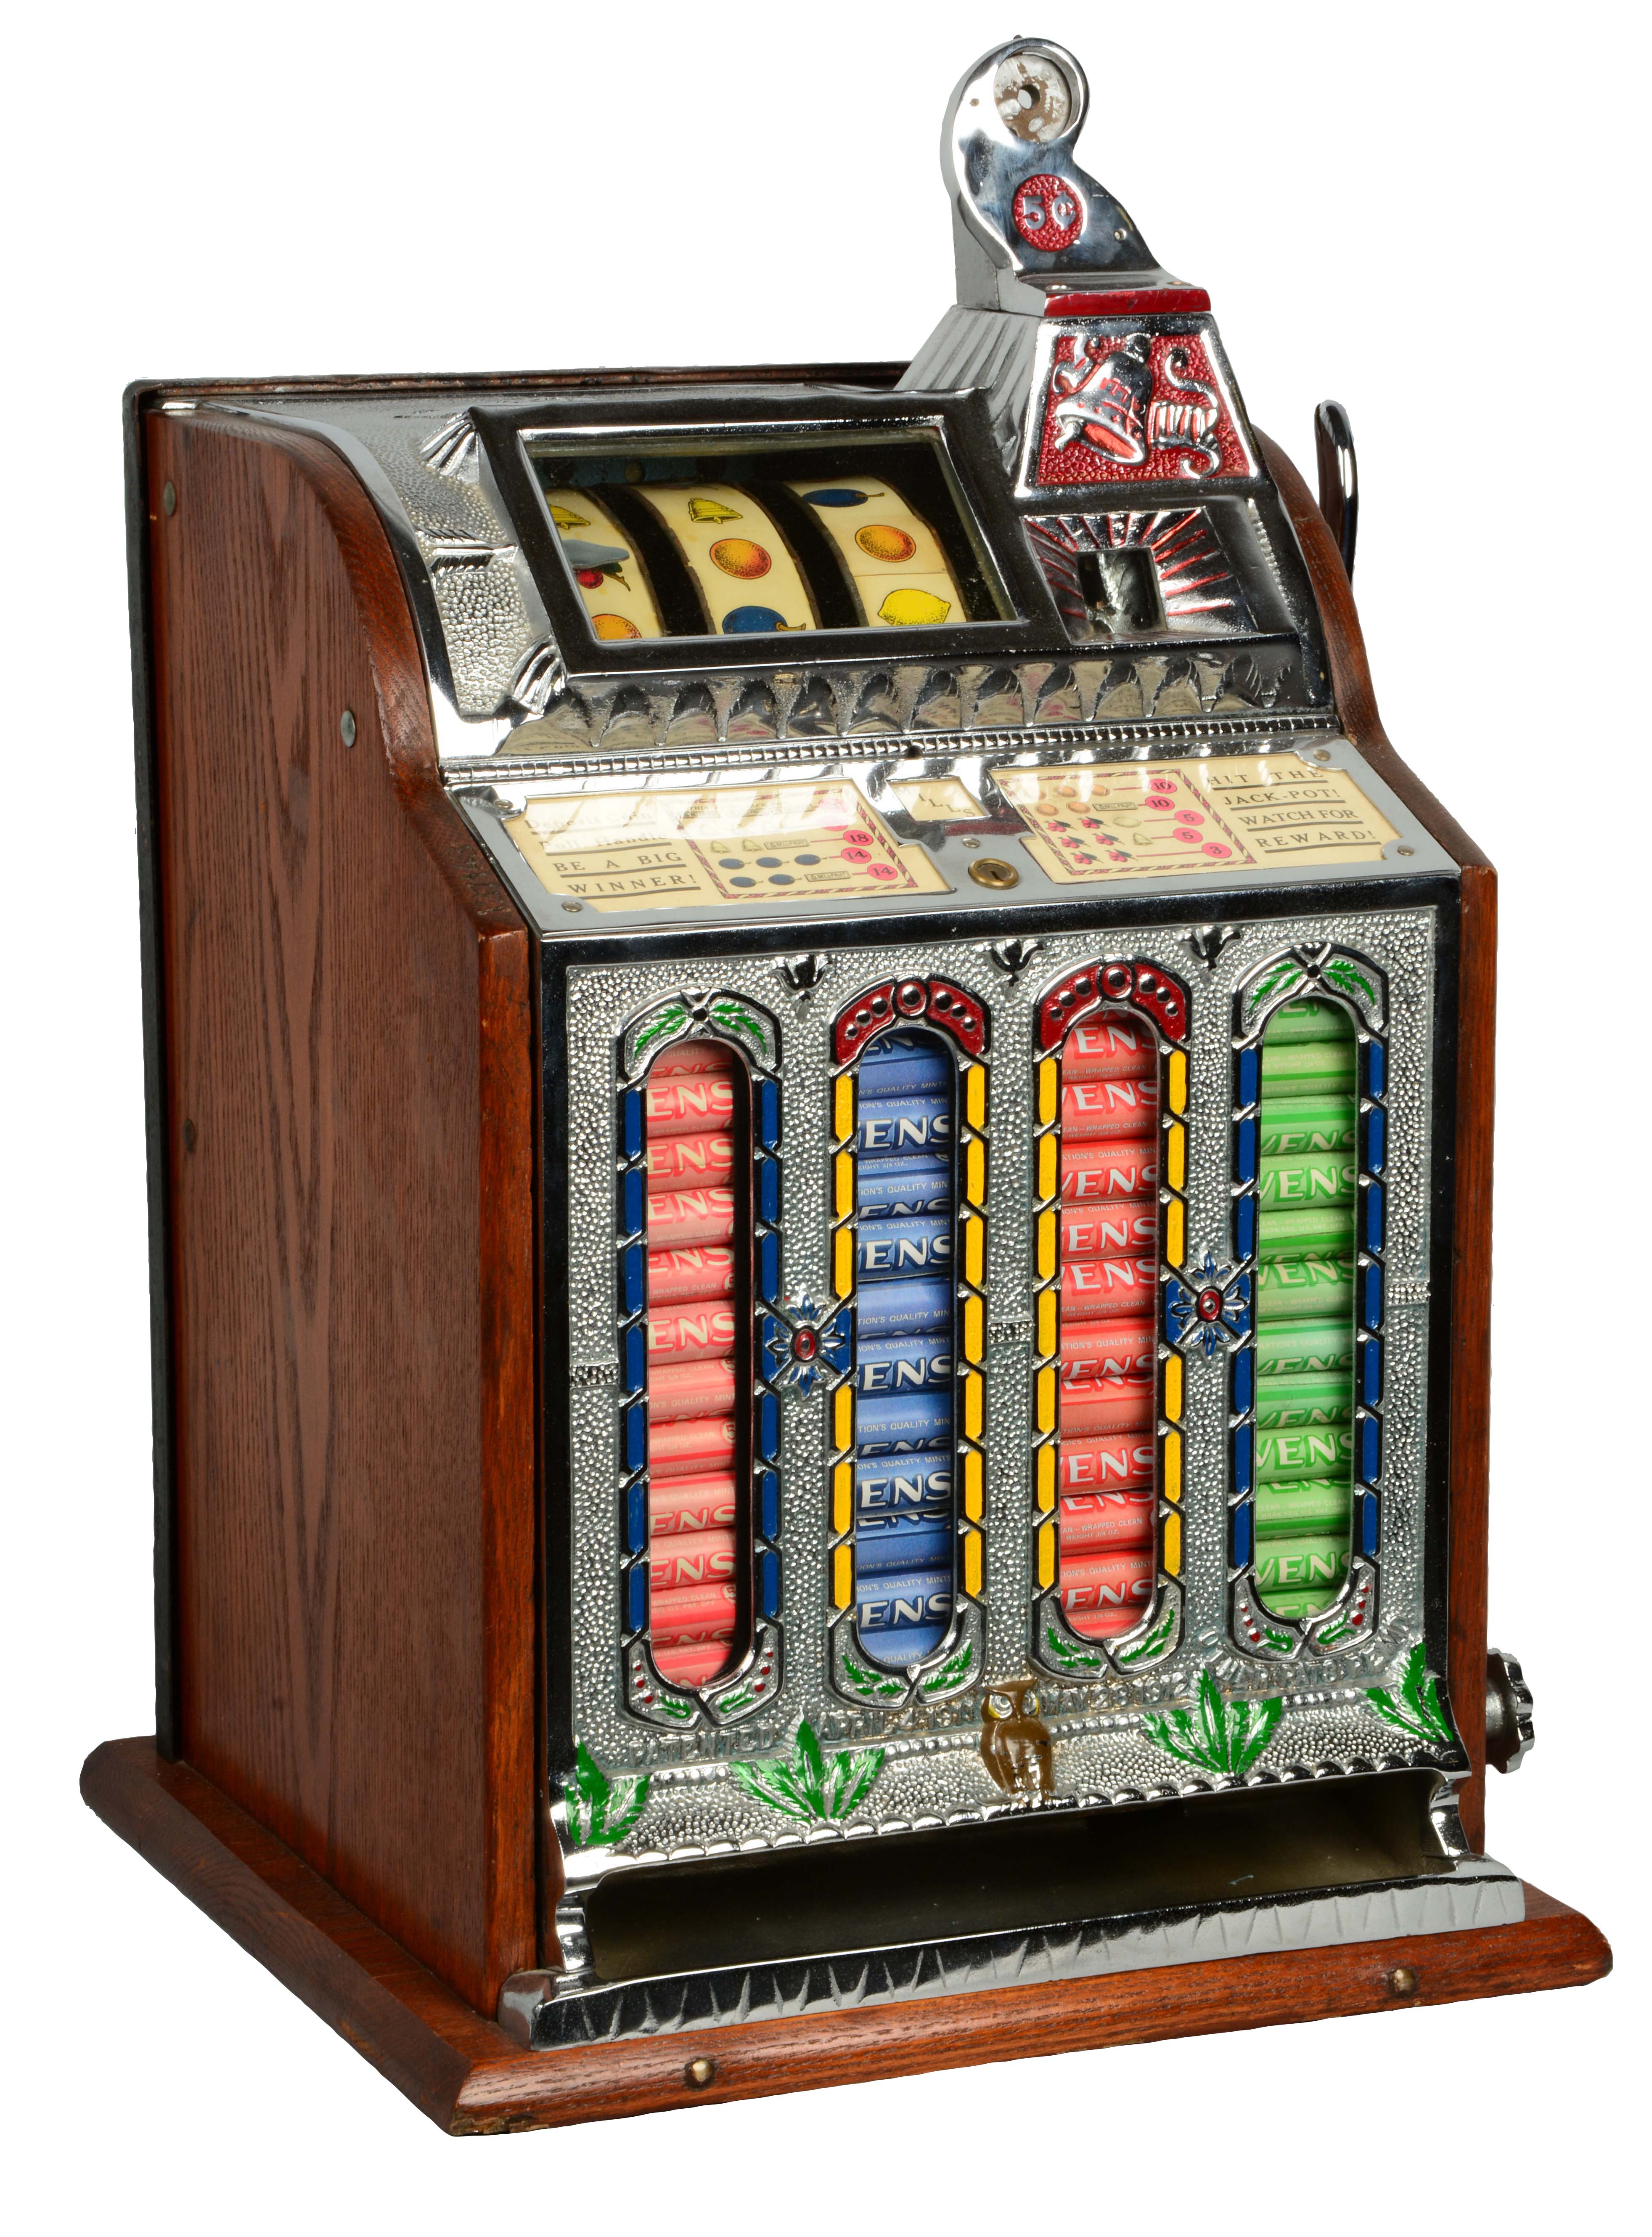 mills mystery front slot machine